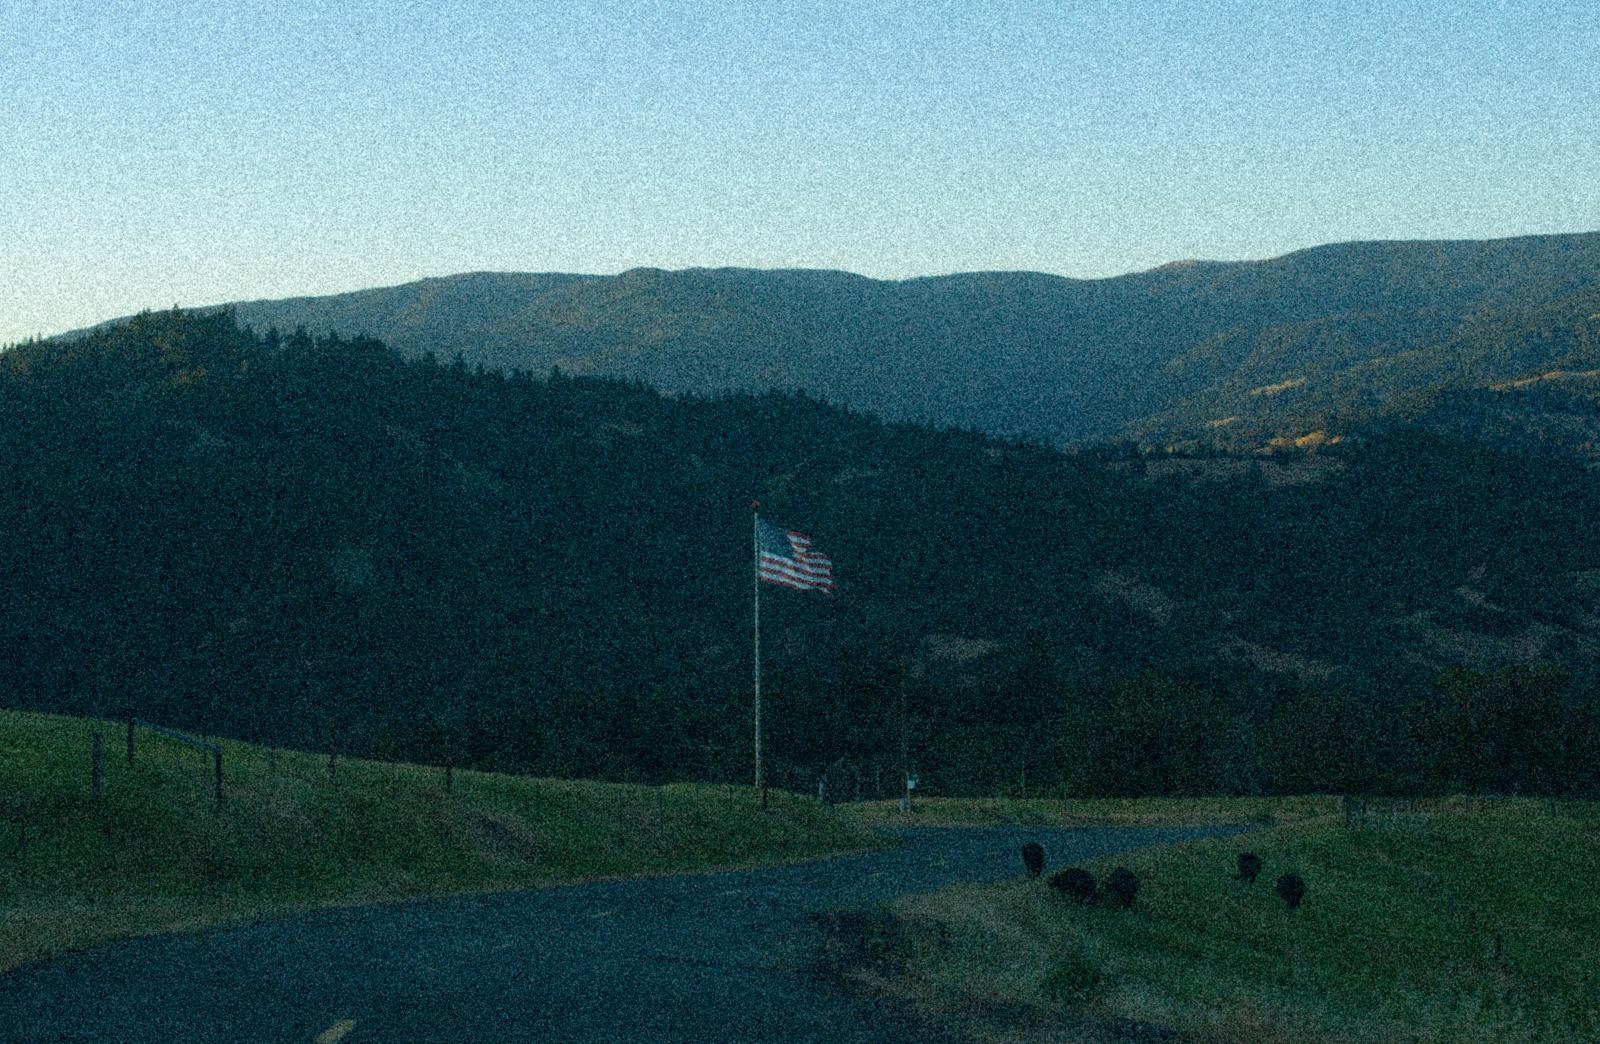 Mountain view from the road at ... winter. Humboldt County, 2018.